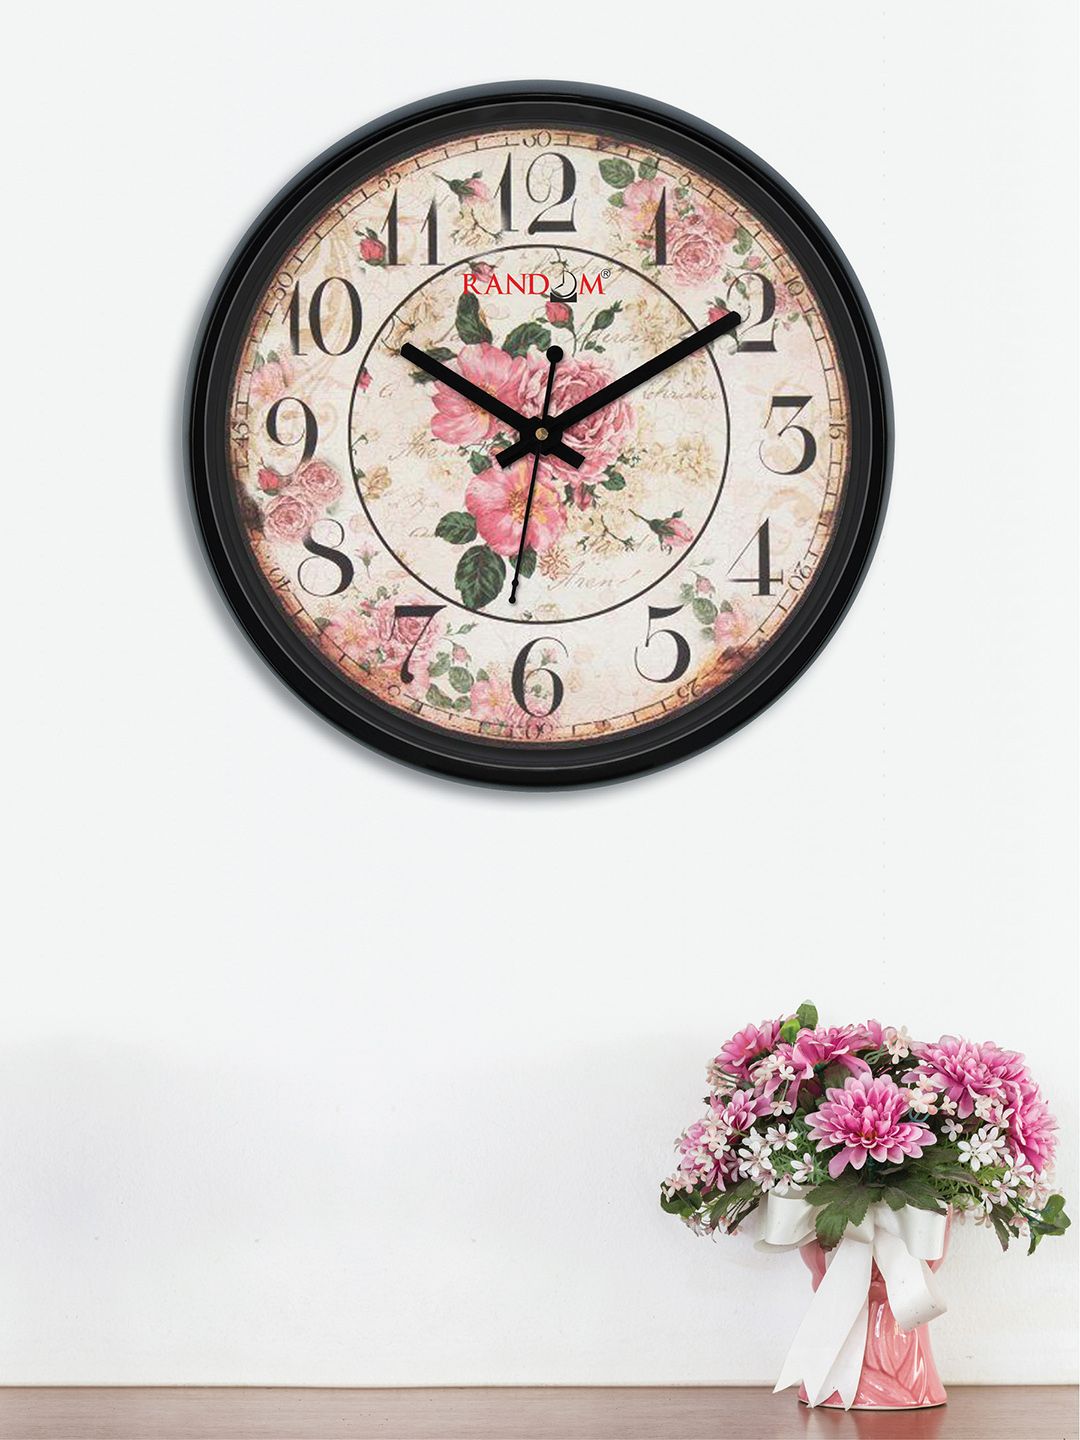 RANDOM Multicoloured & Pink Round Printed 30 cm Analogue Wall Clock Price in India